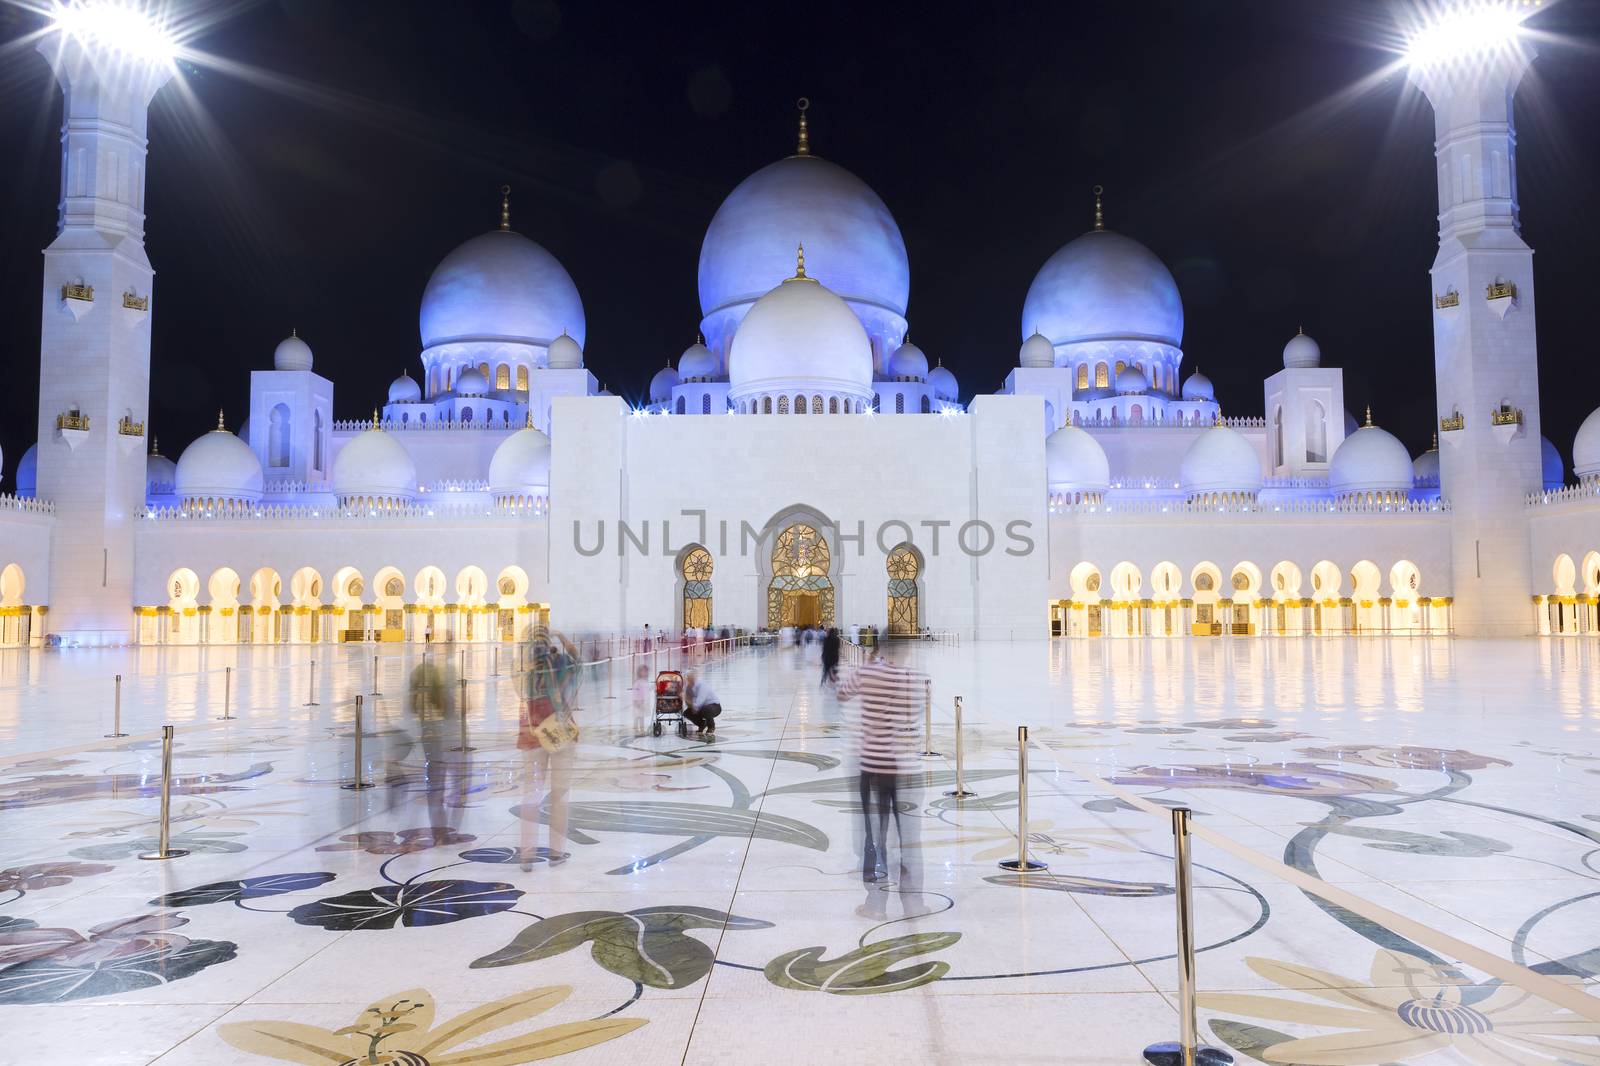 View in the famous Abu Dhabi Sheikh Zayed Mosque by vwalakte